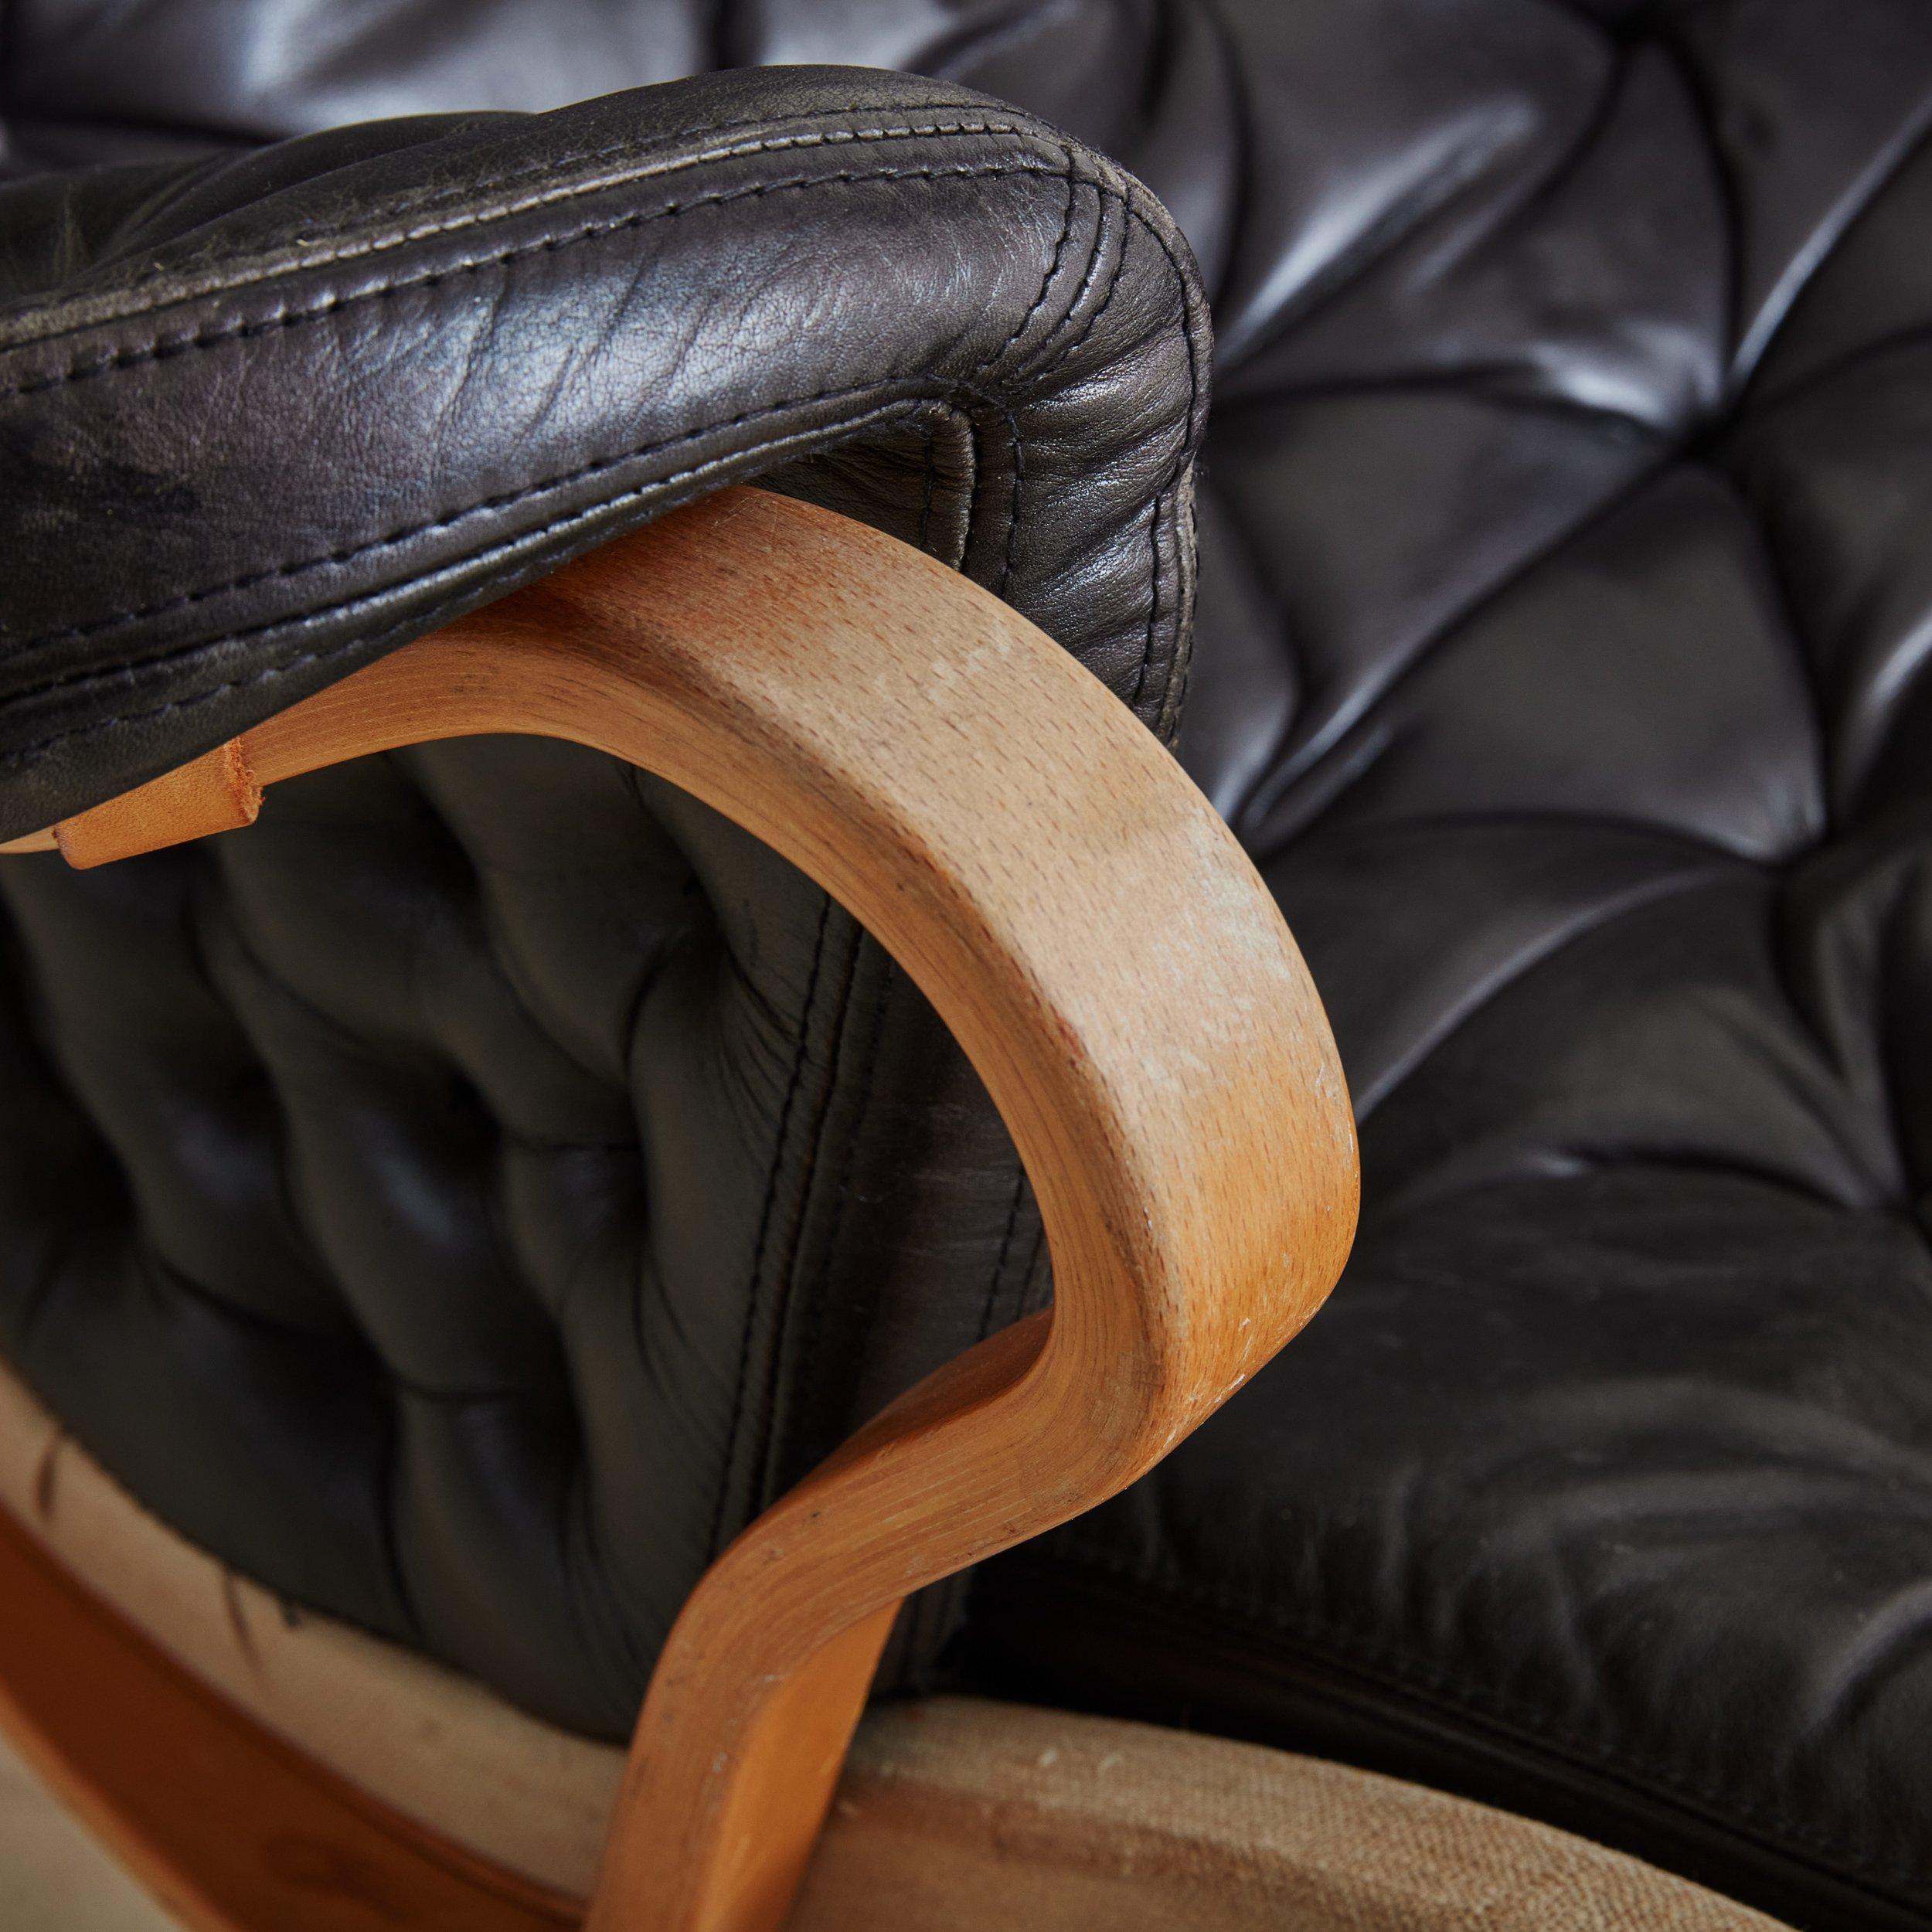 Black Leather Tufted 'Pernilla' Armchair by Bruno Mathsson for DUX, Sweden 1960s For Sale 3